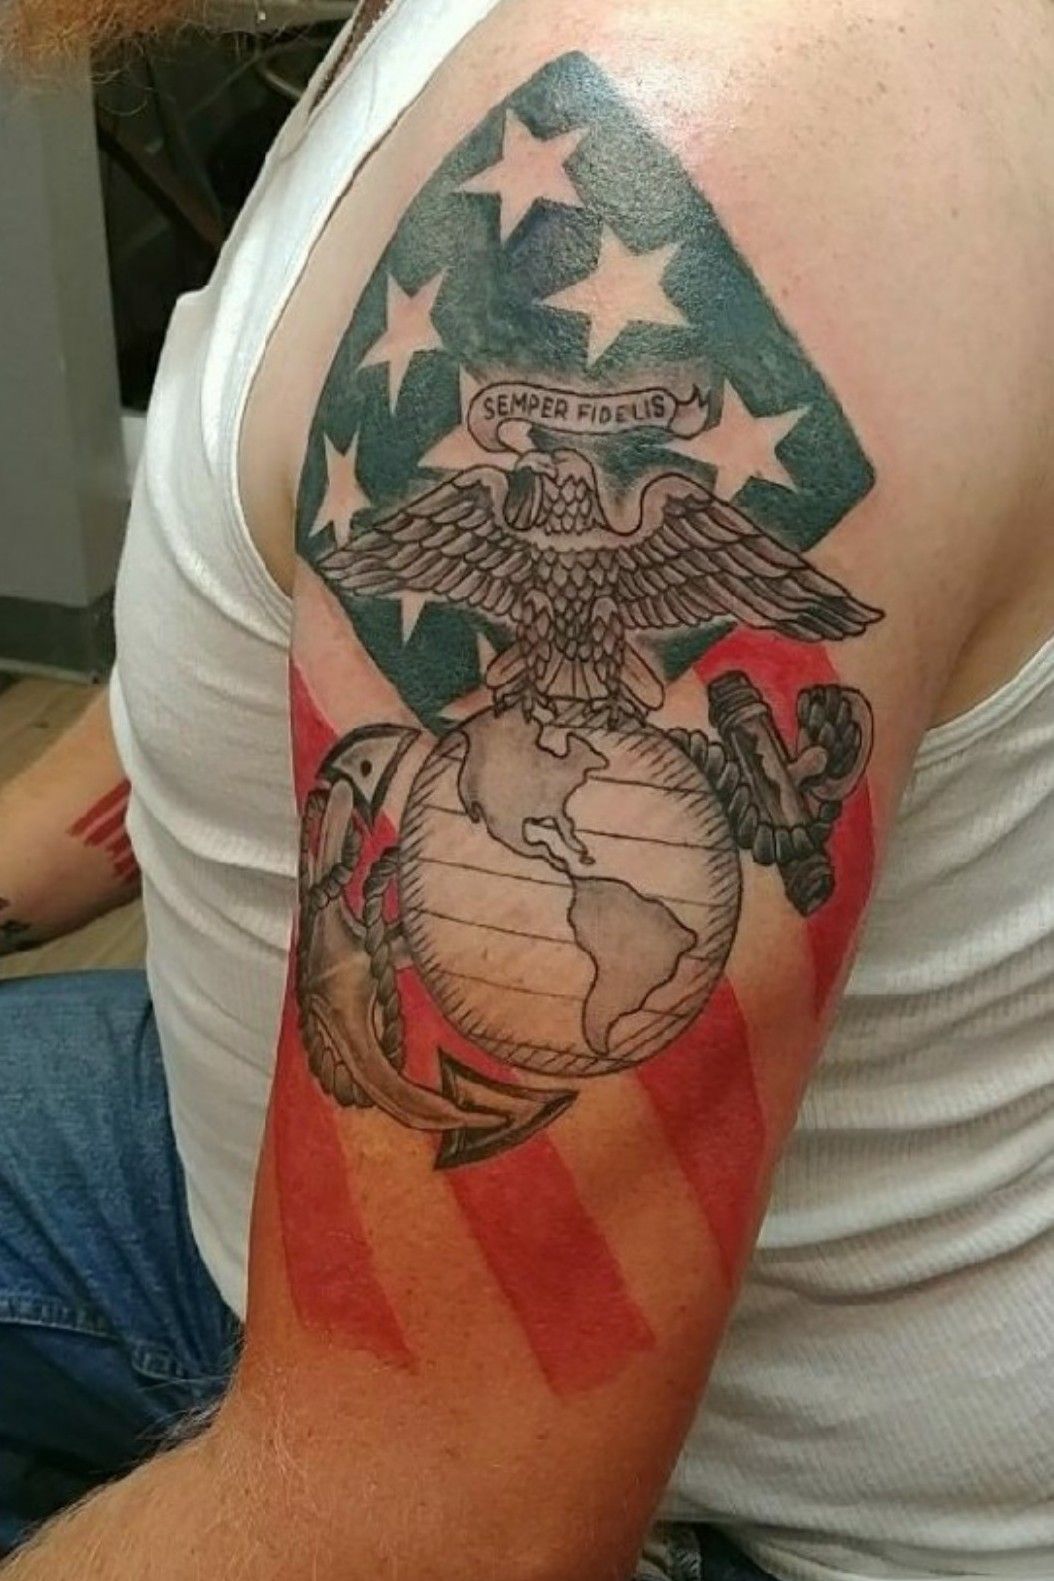 Veteran Ink  EAGLE GLOBE ANCHOR If youre a marine and reading this  now comment OORAH below Tattoo by allanleemurphy marinetattoo  usmctattoo usmcveteran usmcvet veteranink militarytattoo  Facebook